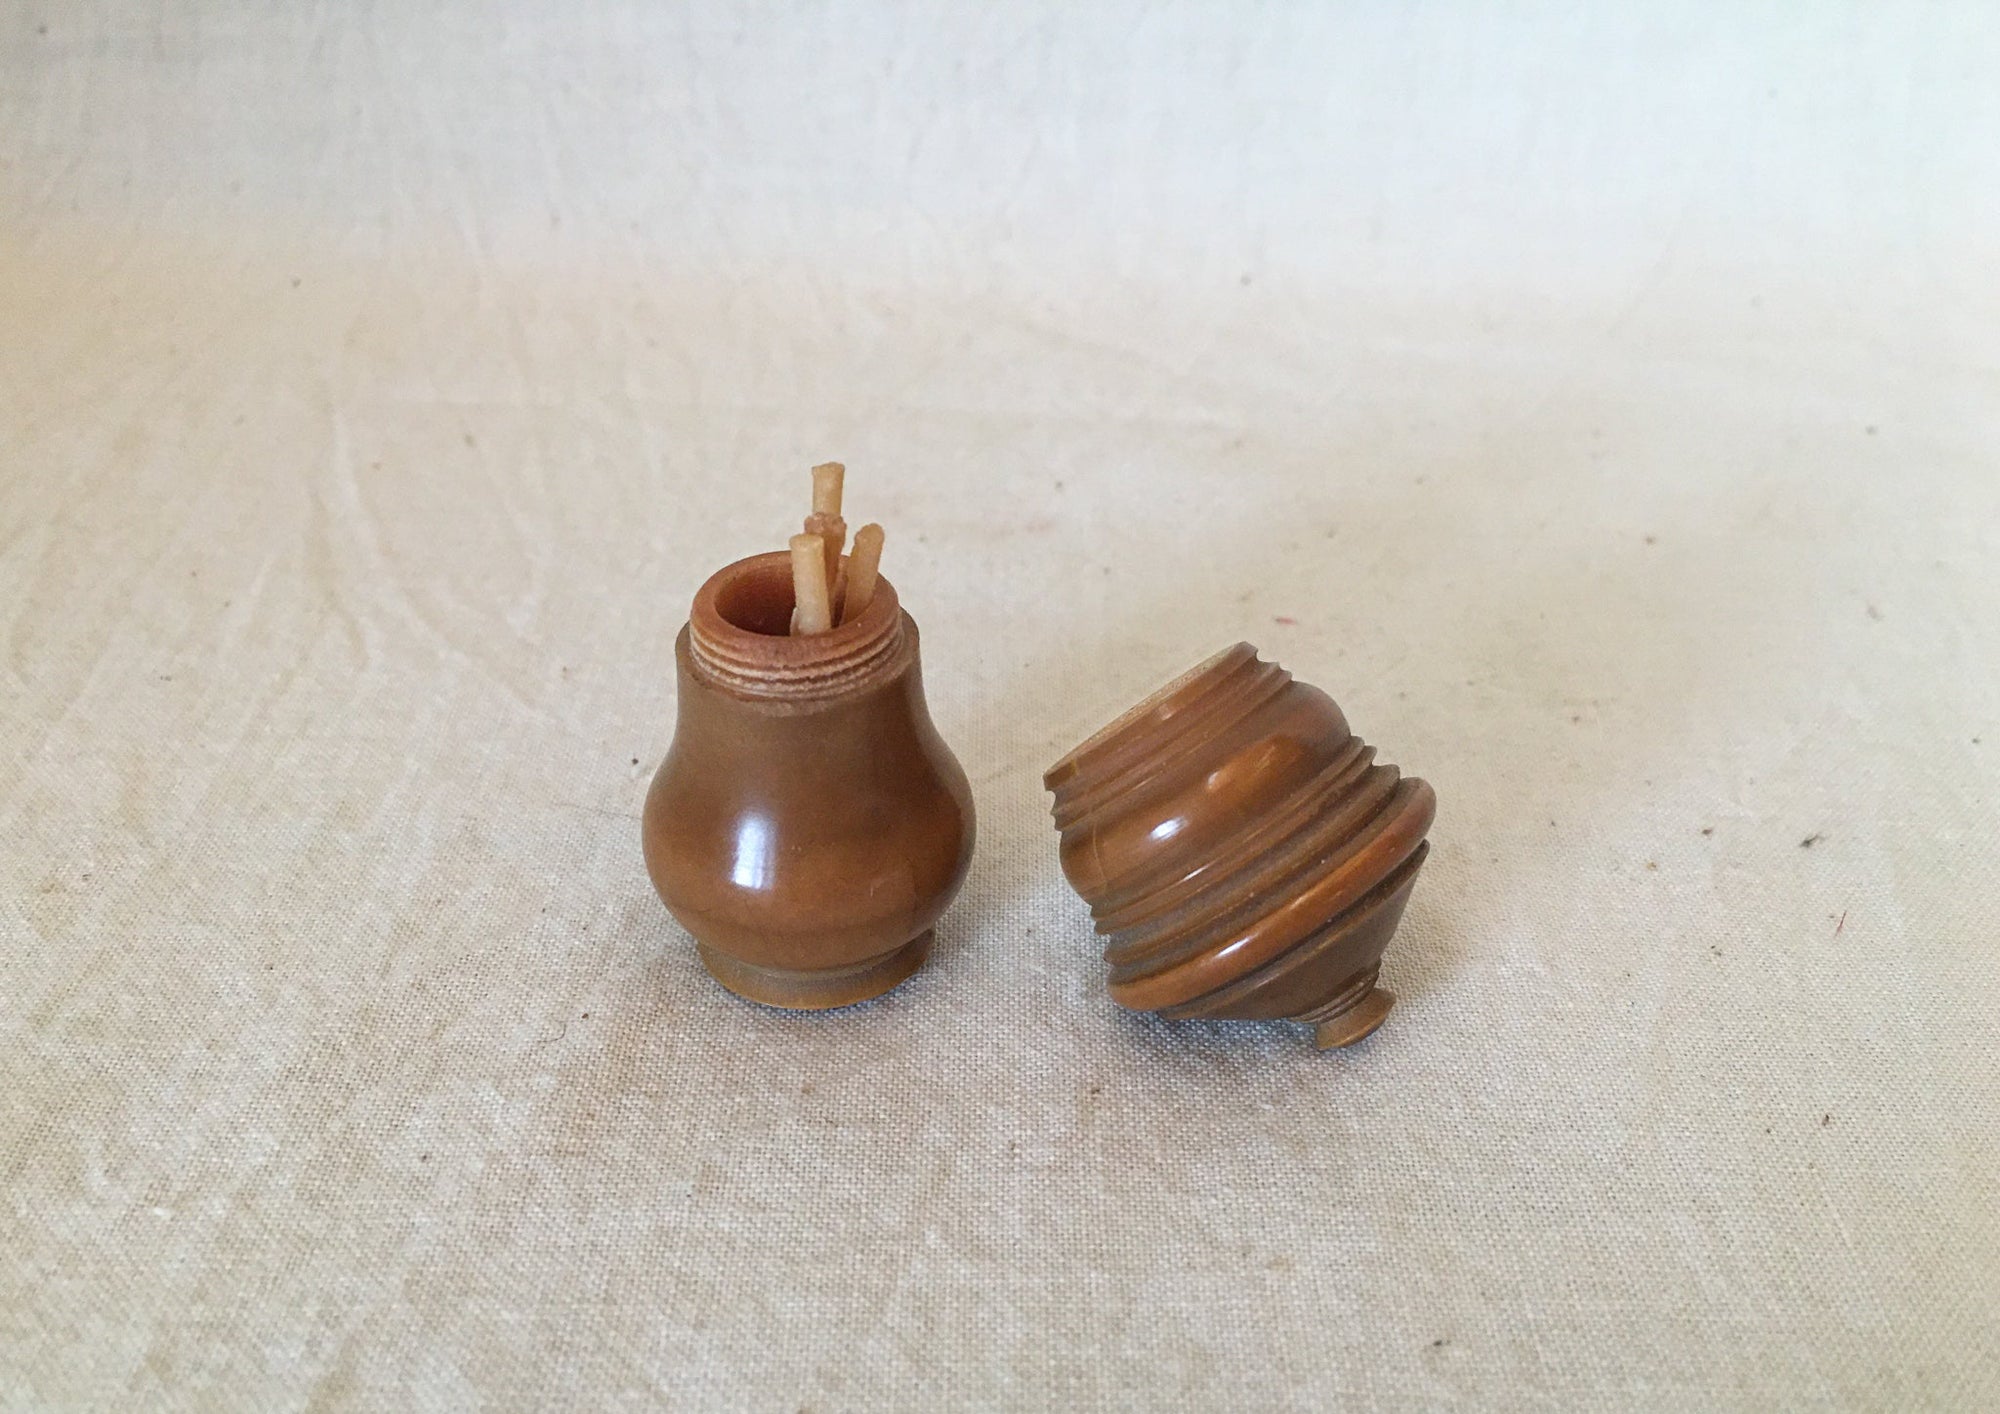 LeHay's Vintage Shop, 1800’s Carved Coquilla Nut Match Holder with Original Matches